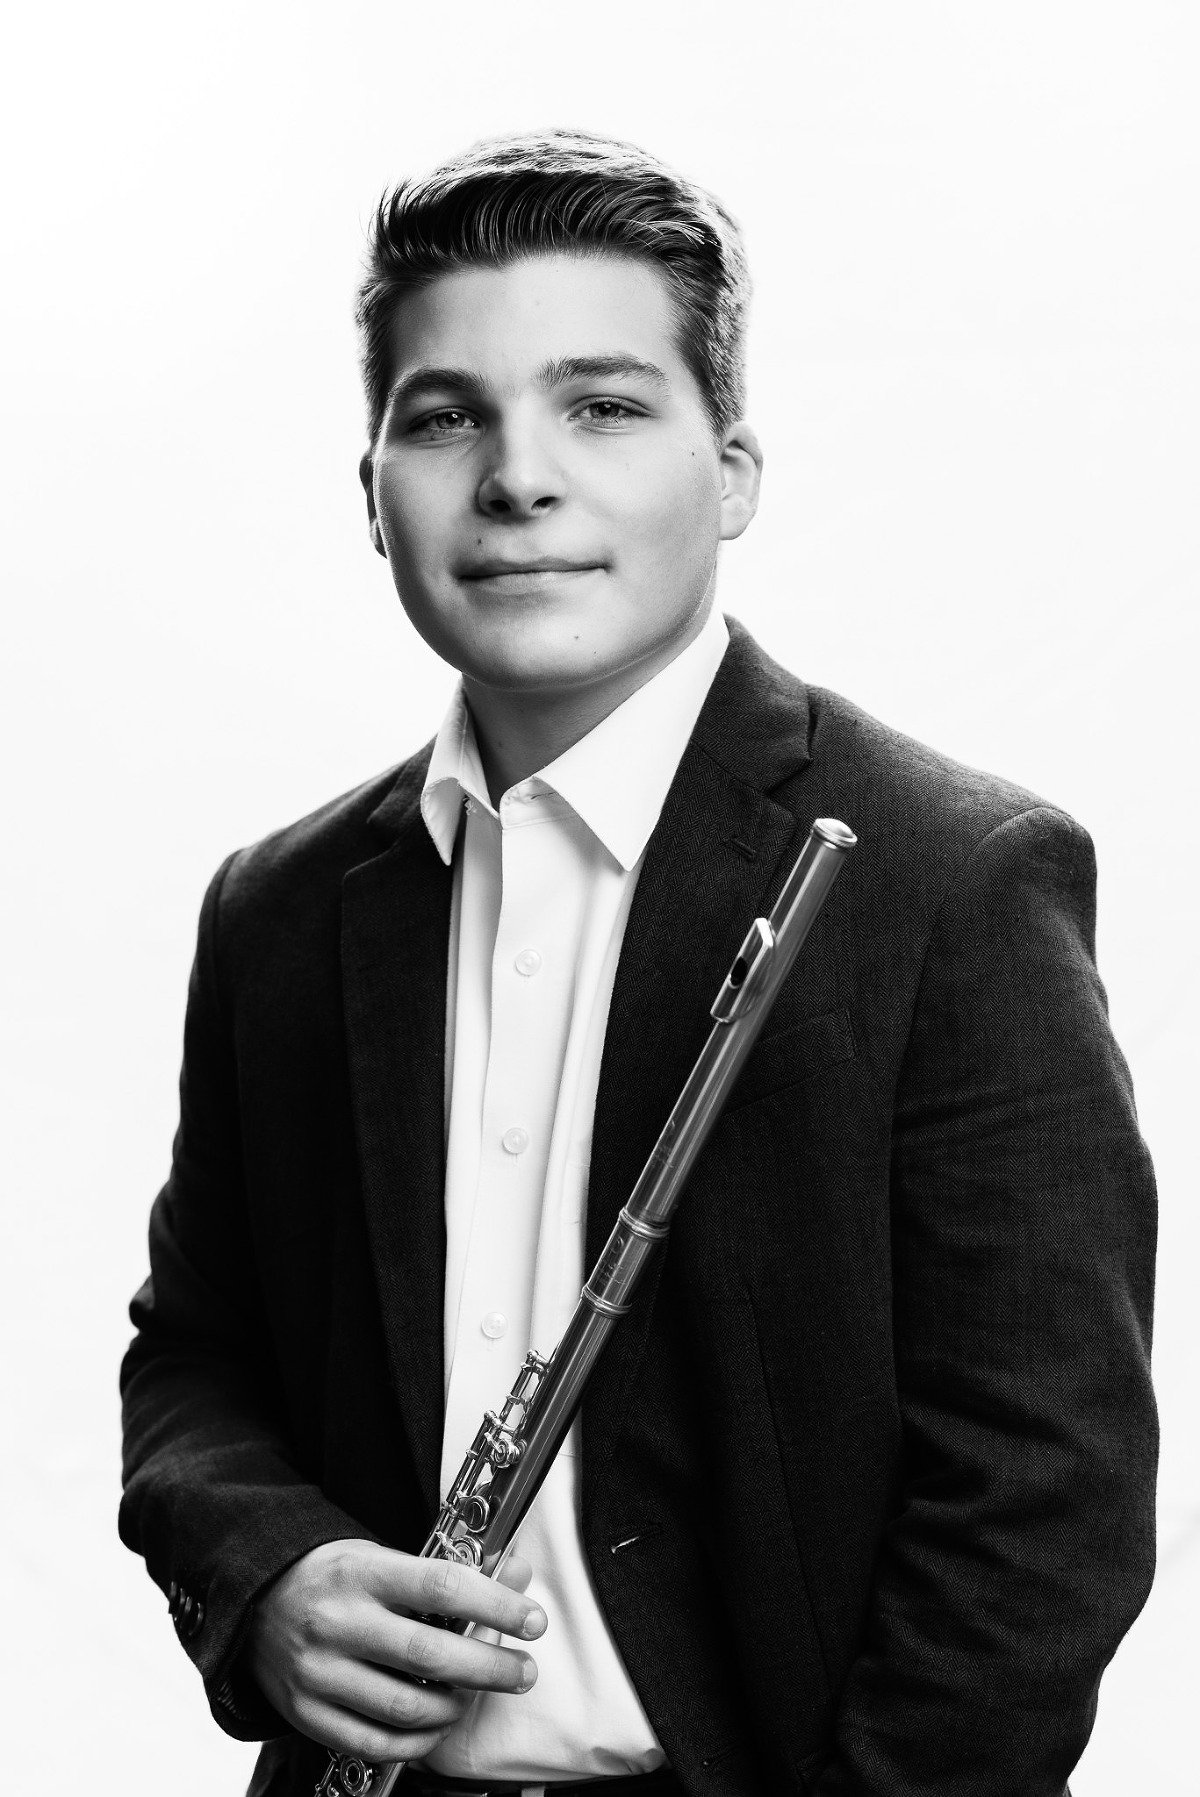 Young musician with flute against white background